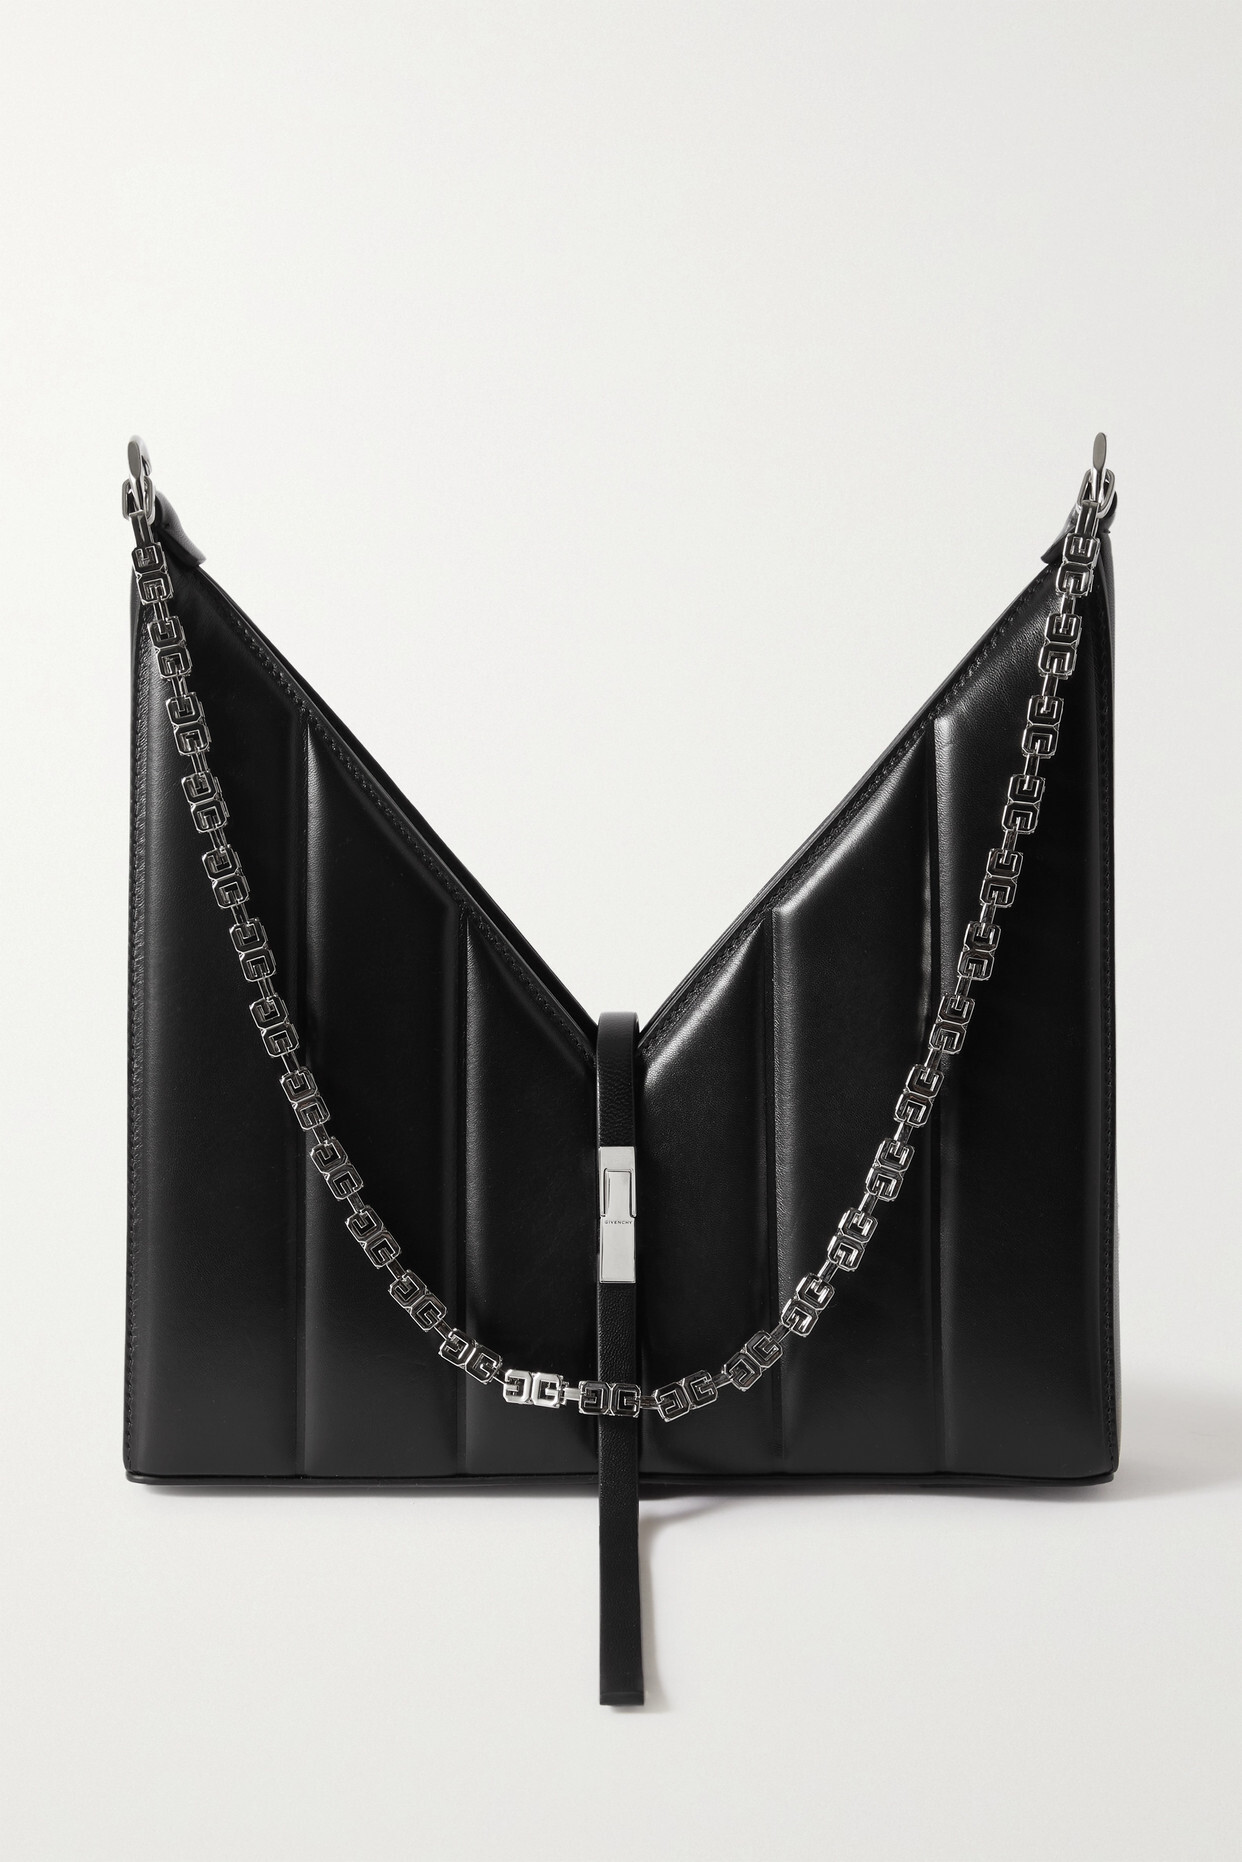 Givenchy - Cut Out Small Leather Shoulder Bag - Black